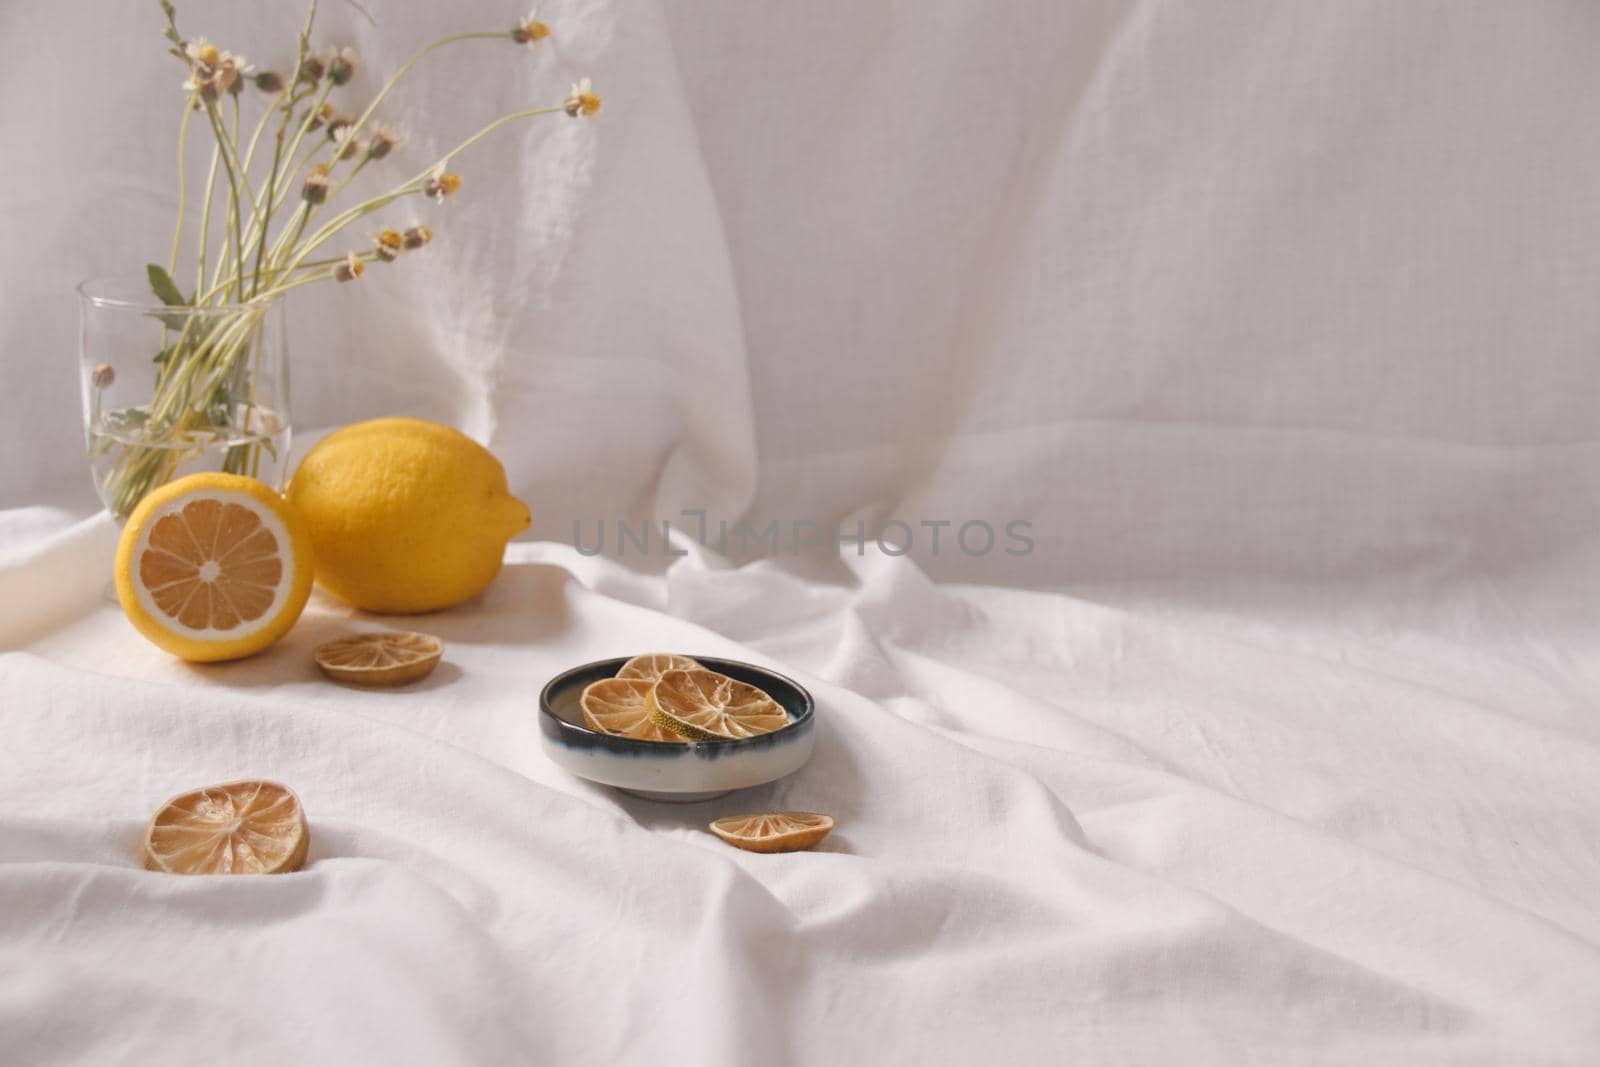 Minimalist still life of fresh and dried lemons showing the concept of freshness, summer aesthetic and healthy sustainable living